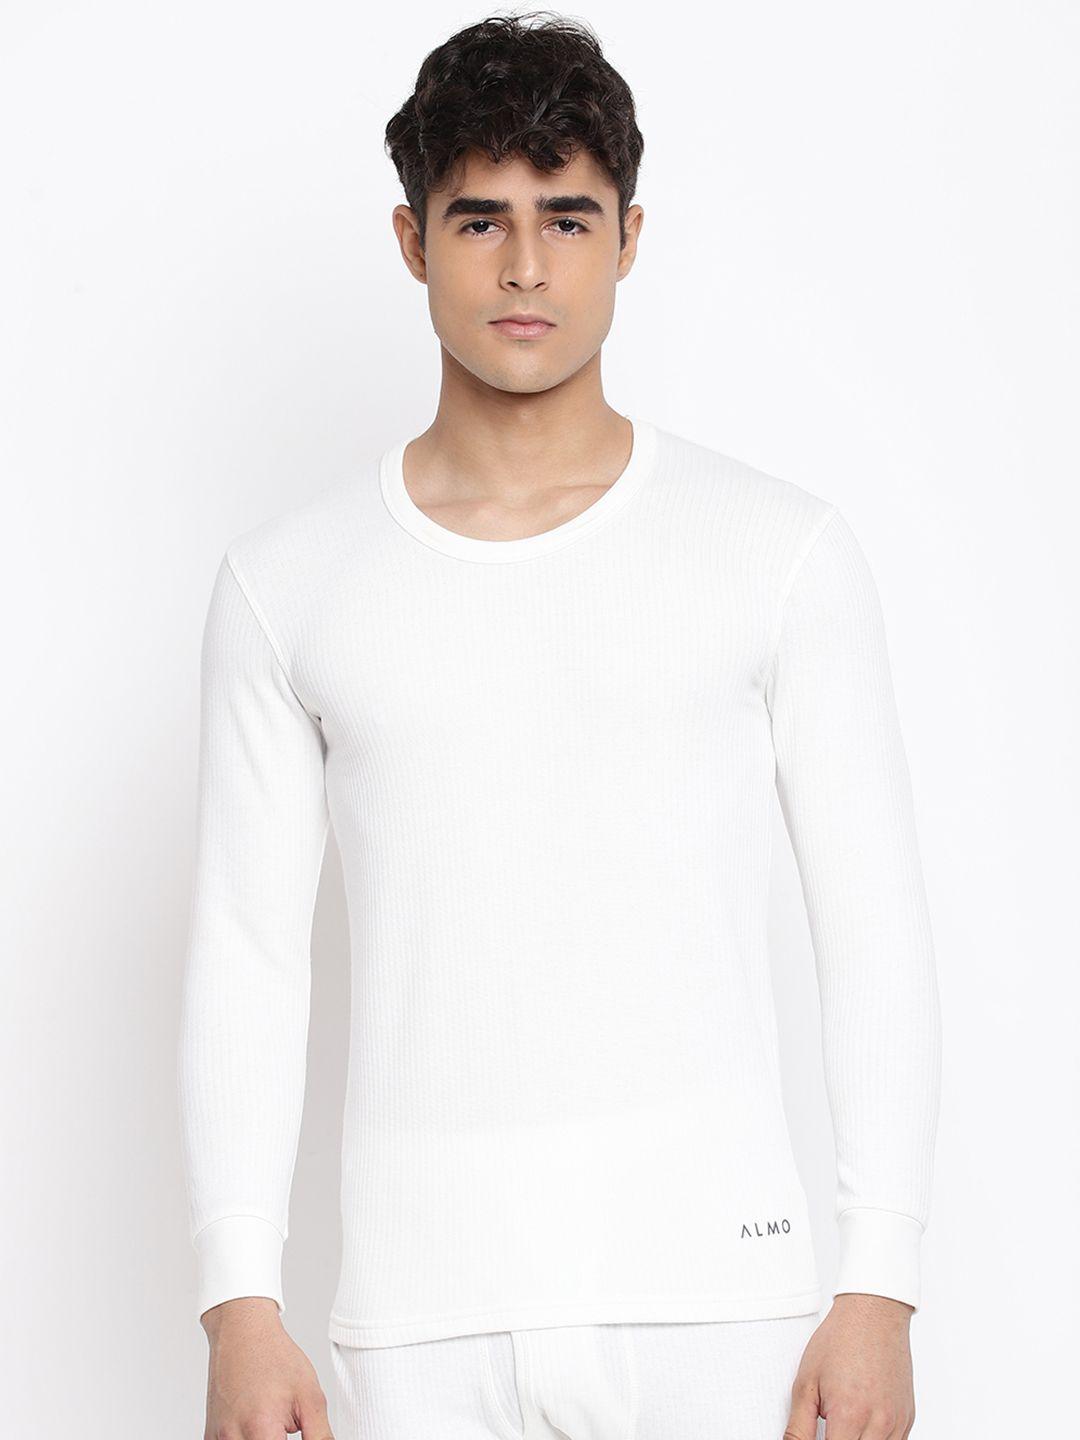 almo-wear-men-white-solid-cotton-ultra-warm-thermal-top